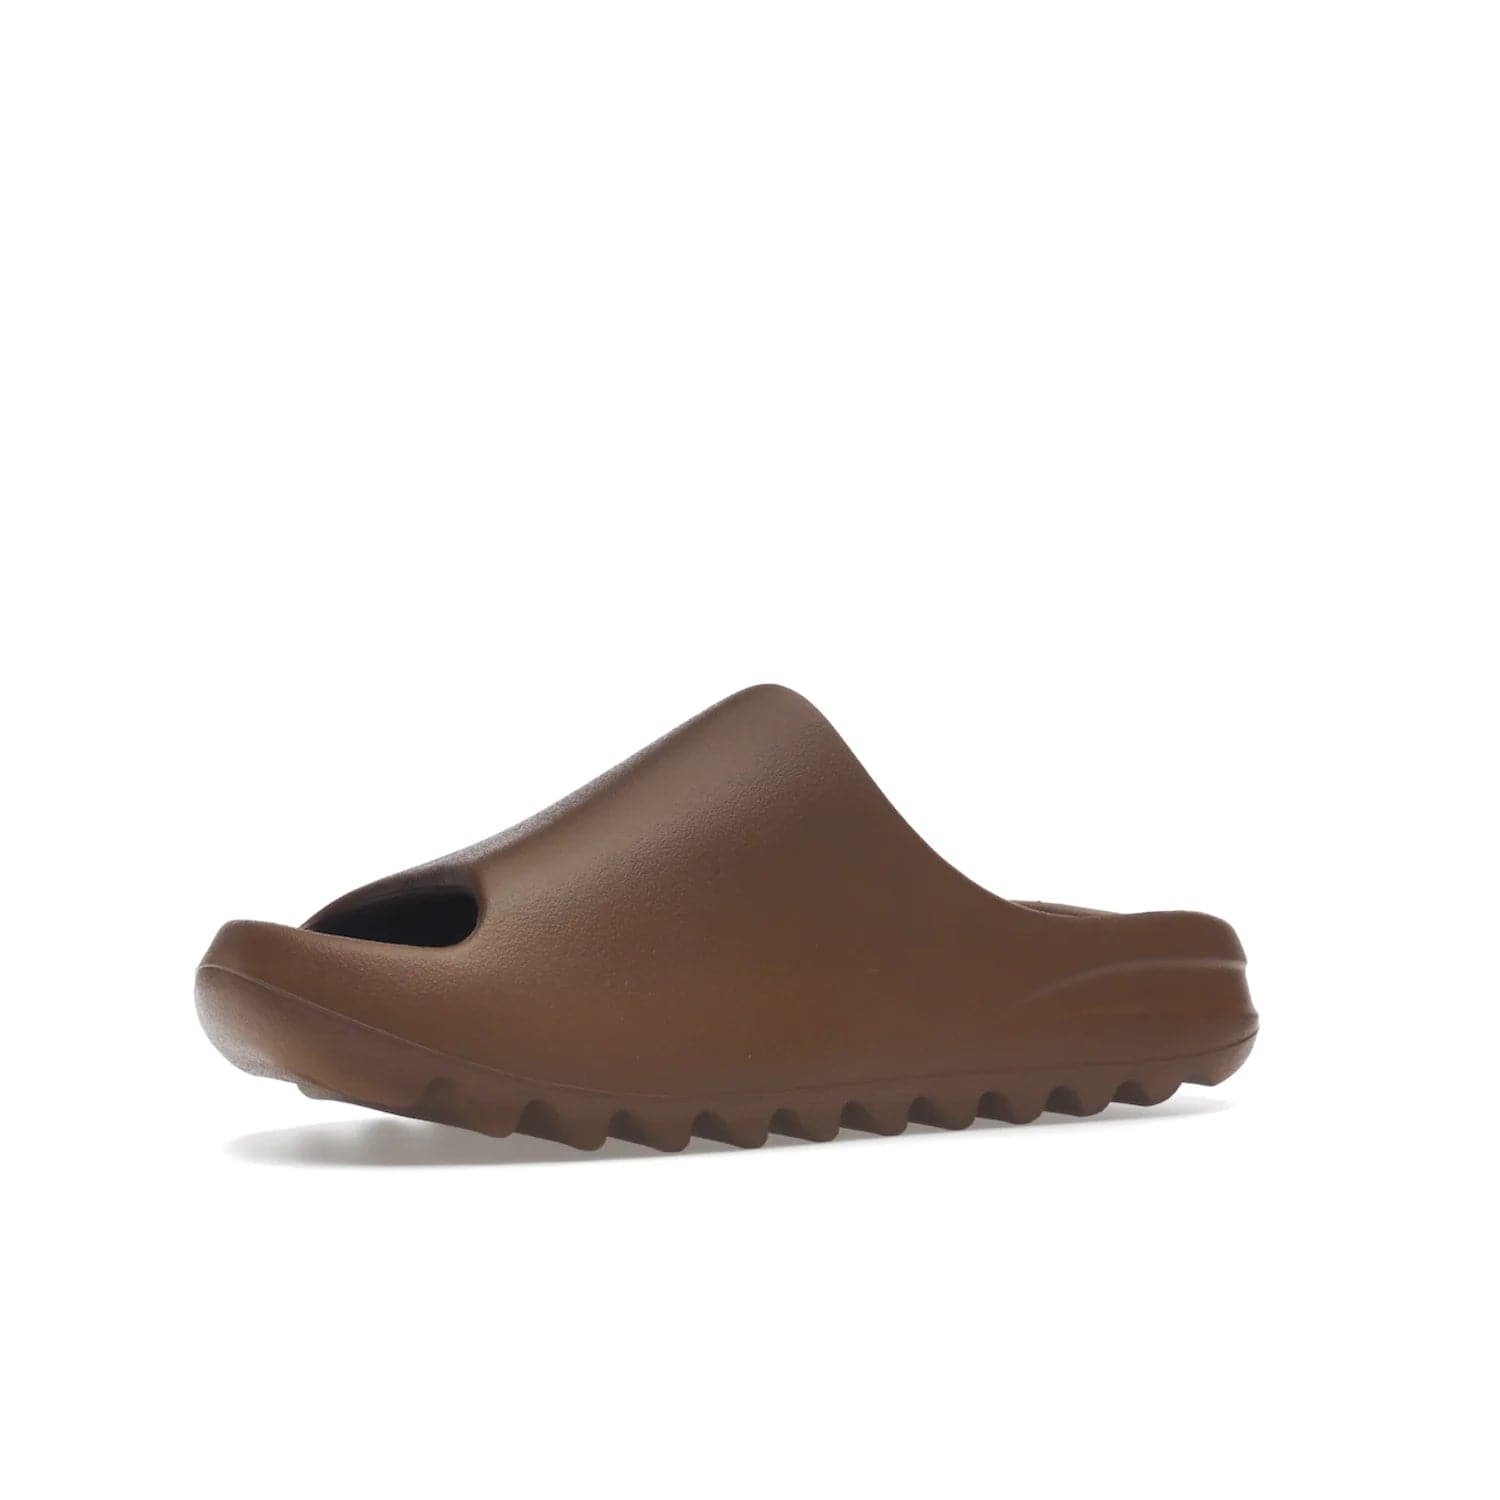 adidas Yeezy Slide Flax - Image 16 - Only at www.BallersClubKickz.com - Score the perfect casual look with the adidas Yeezy Slide Flax. Made with lightweight injected EVA plus horizontal grooves underfoot for traction. Release on August 22, 2022. $70.